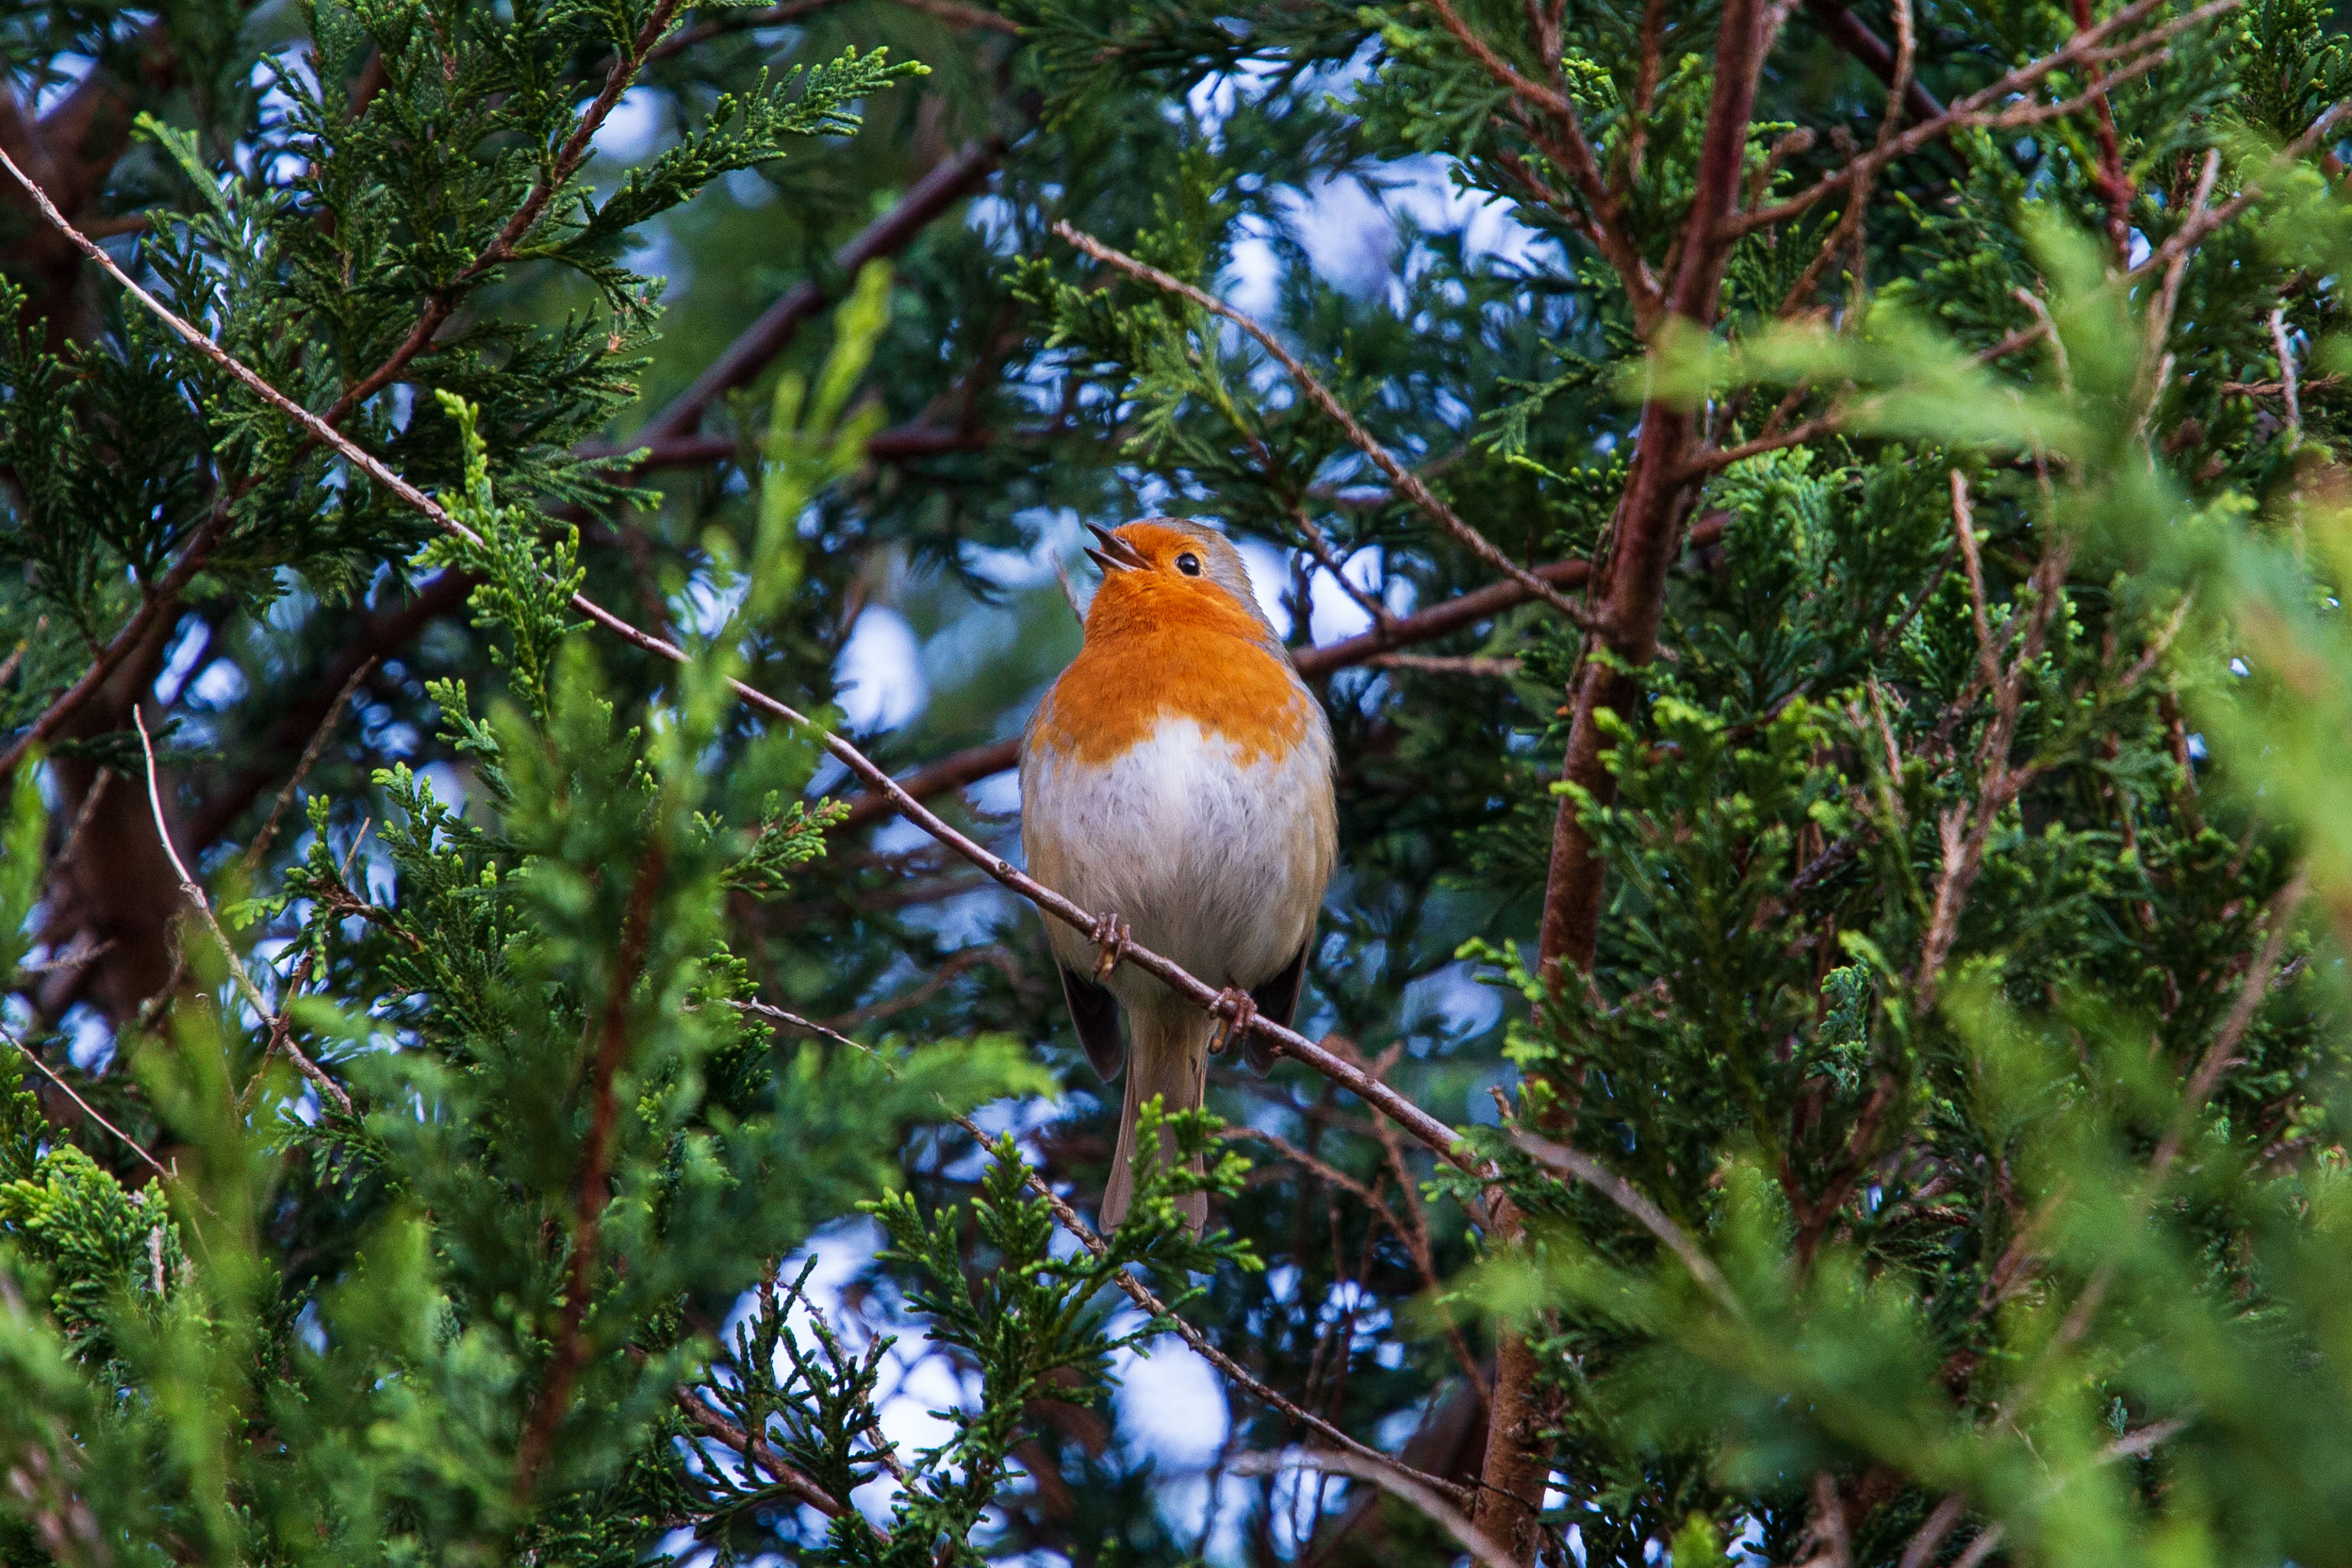 Robin 2
The singing was what made me notice this fella in the first place.
